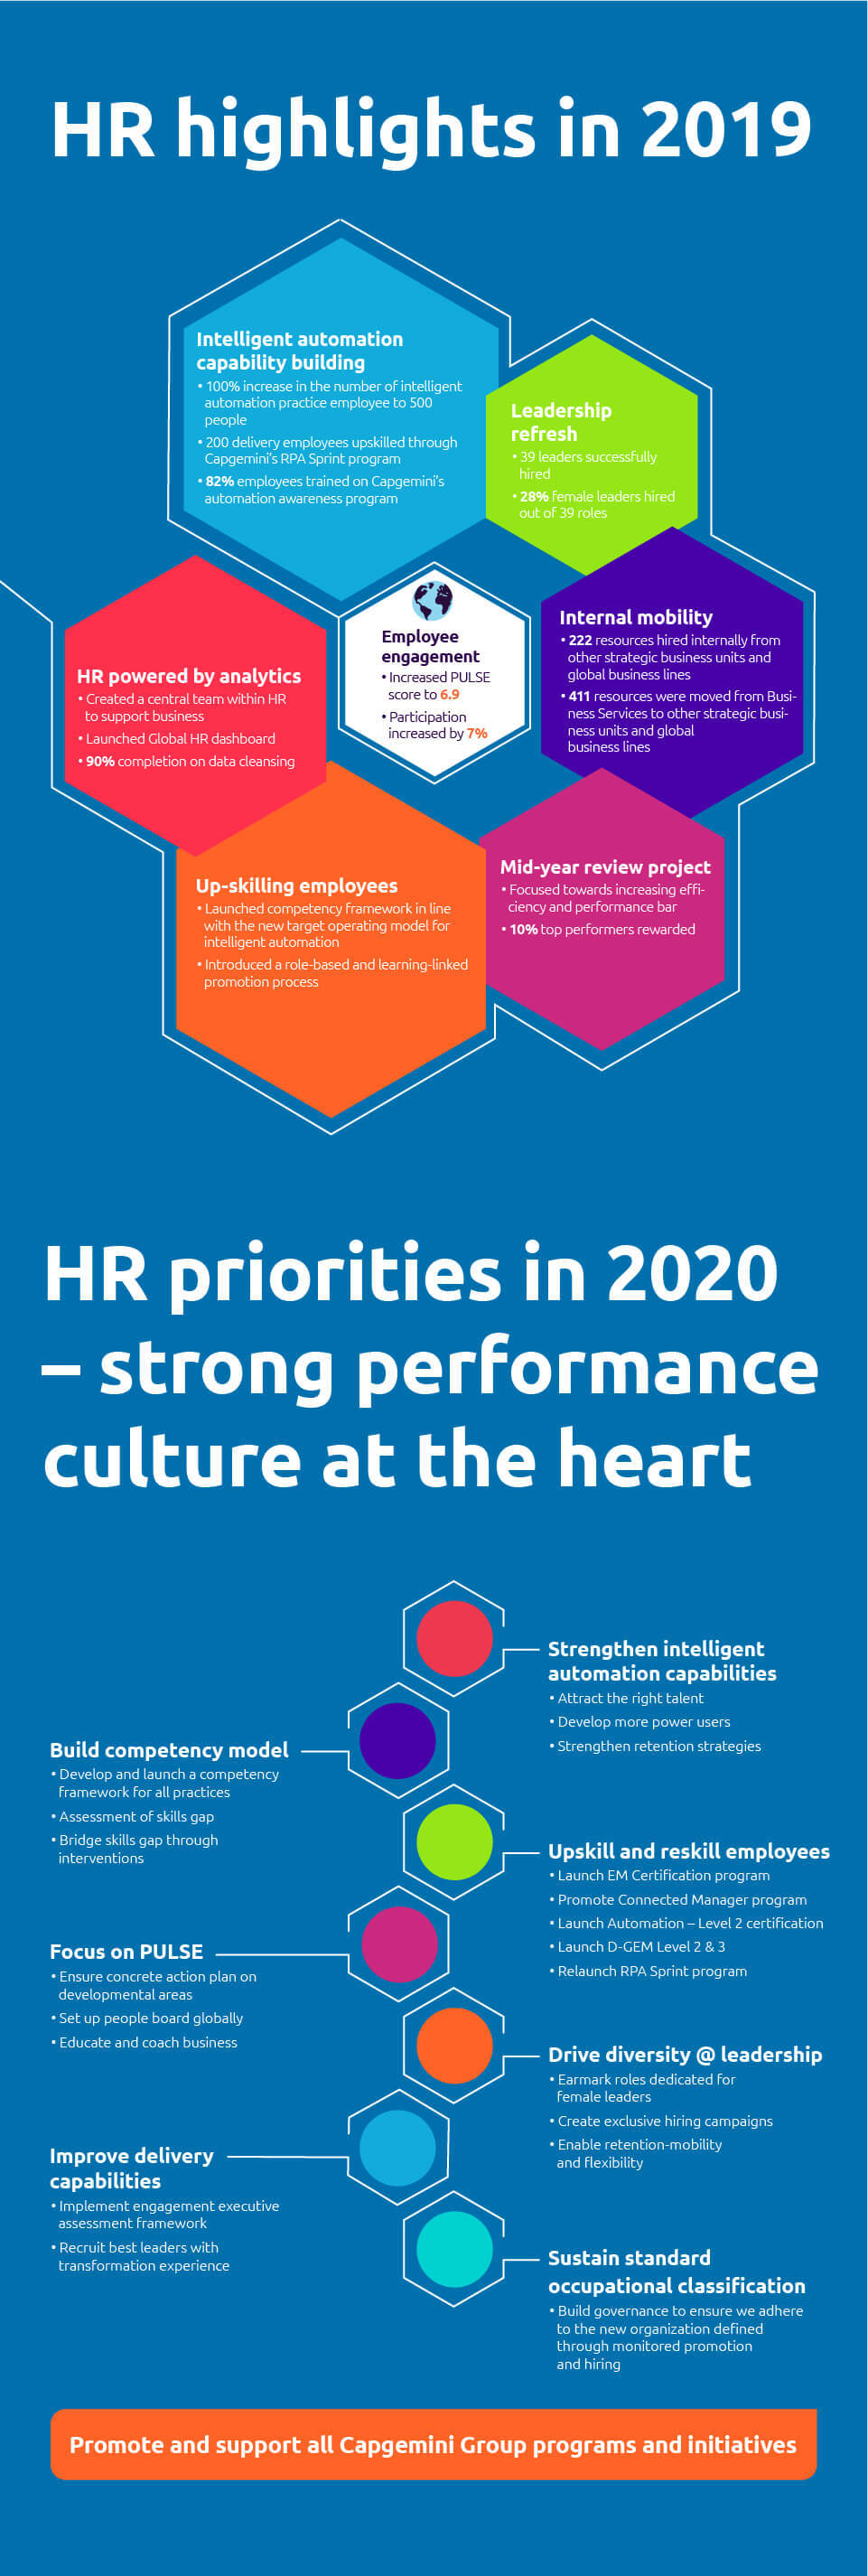 Business Services HR – highlights and priorities